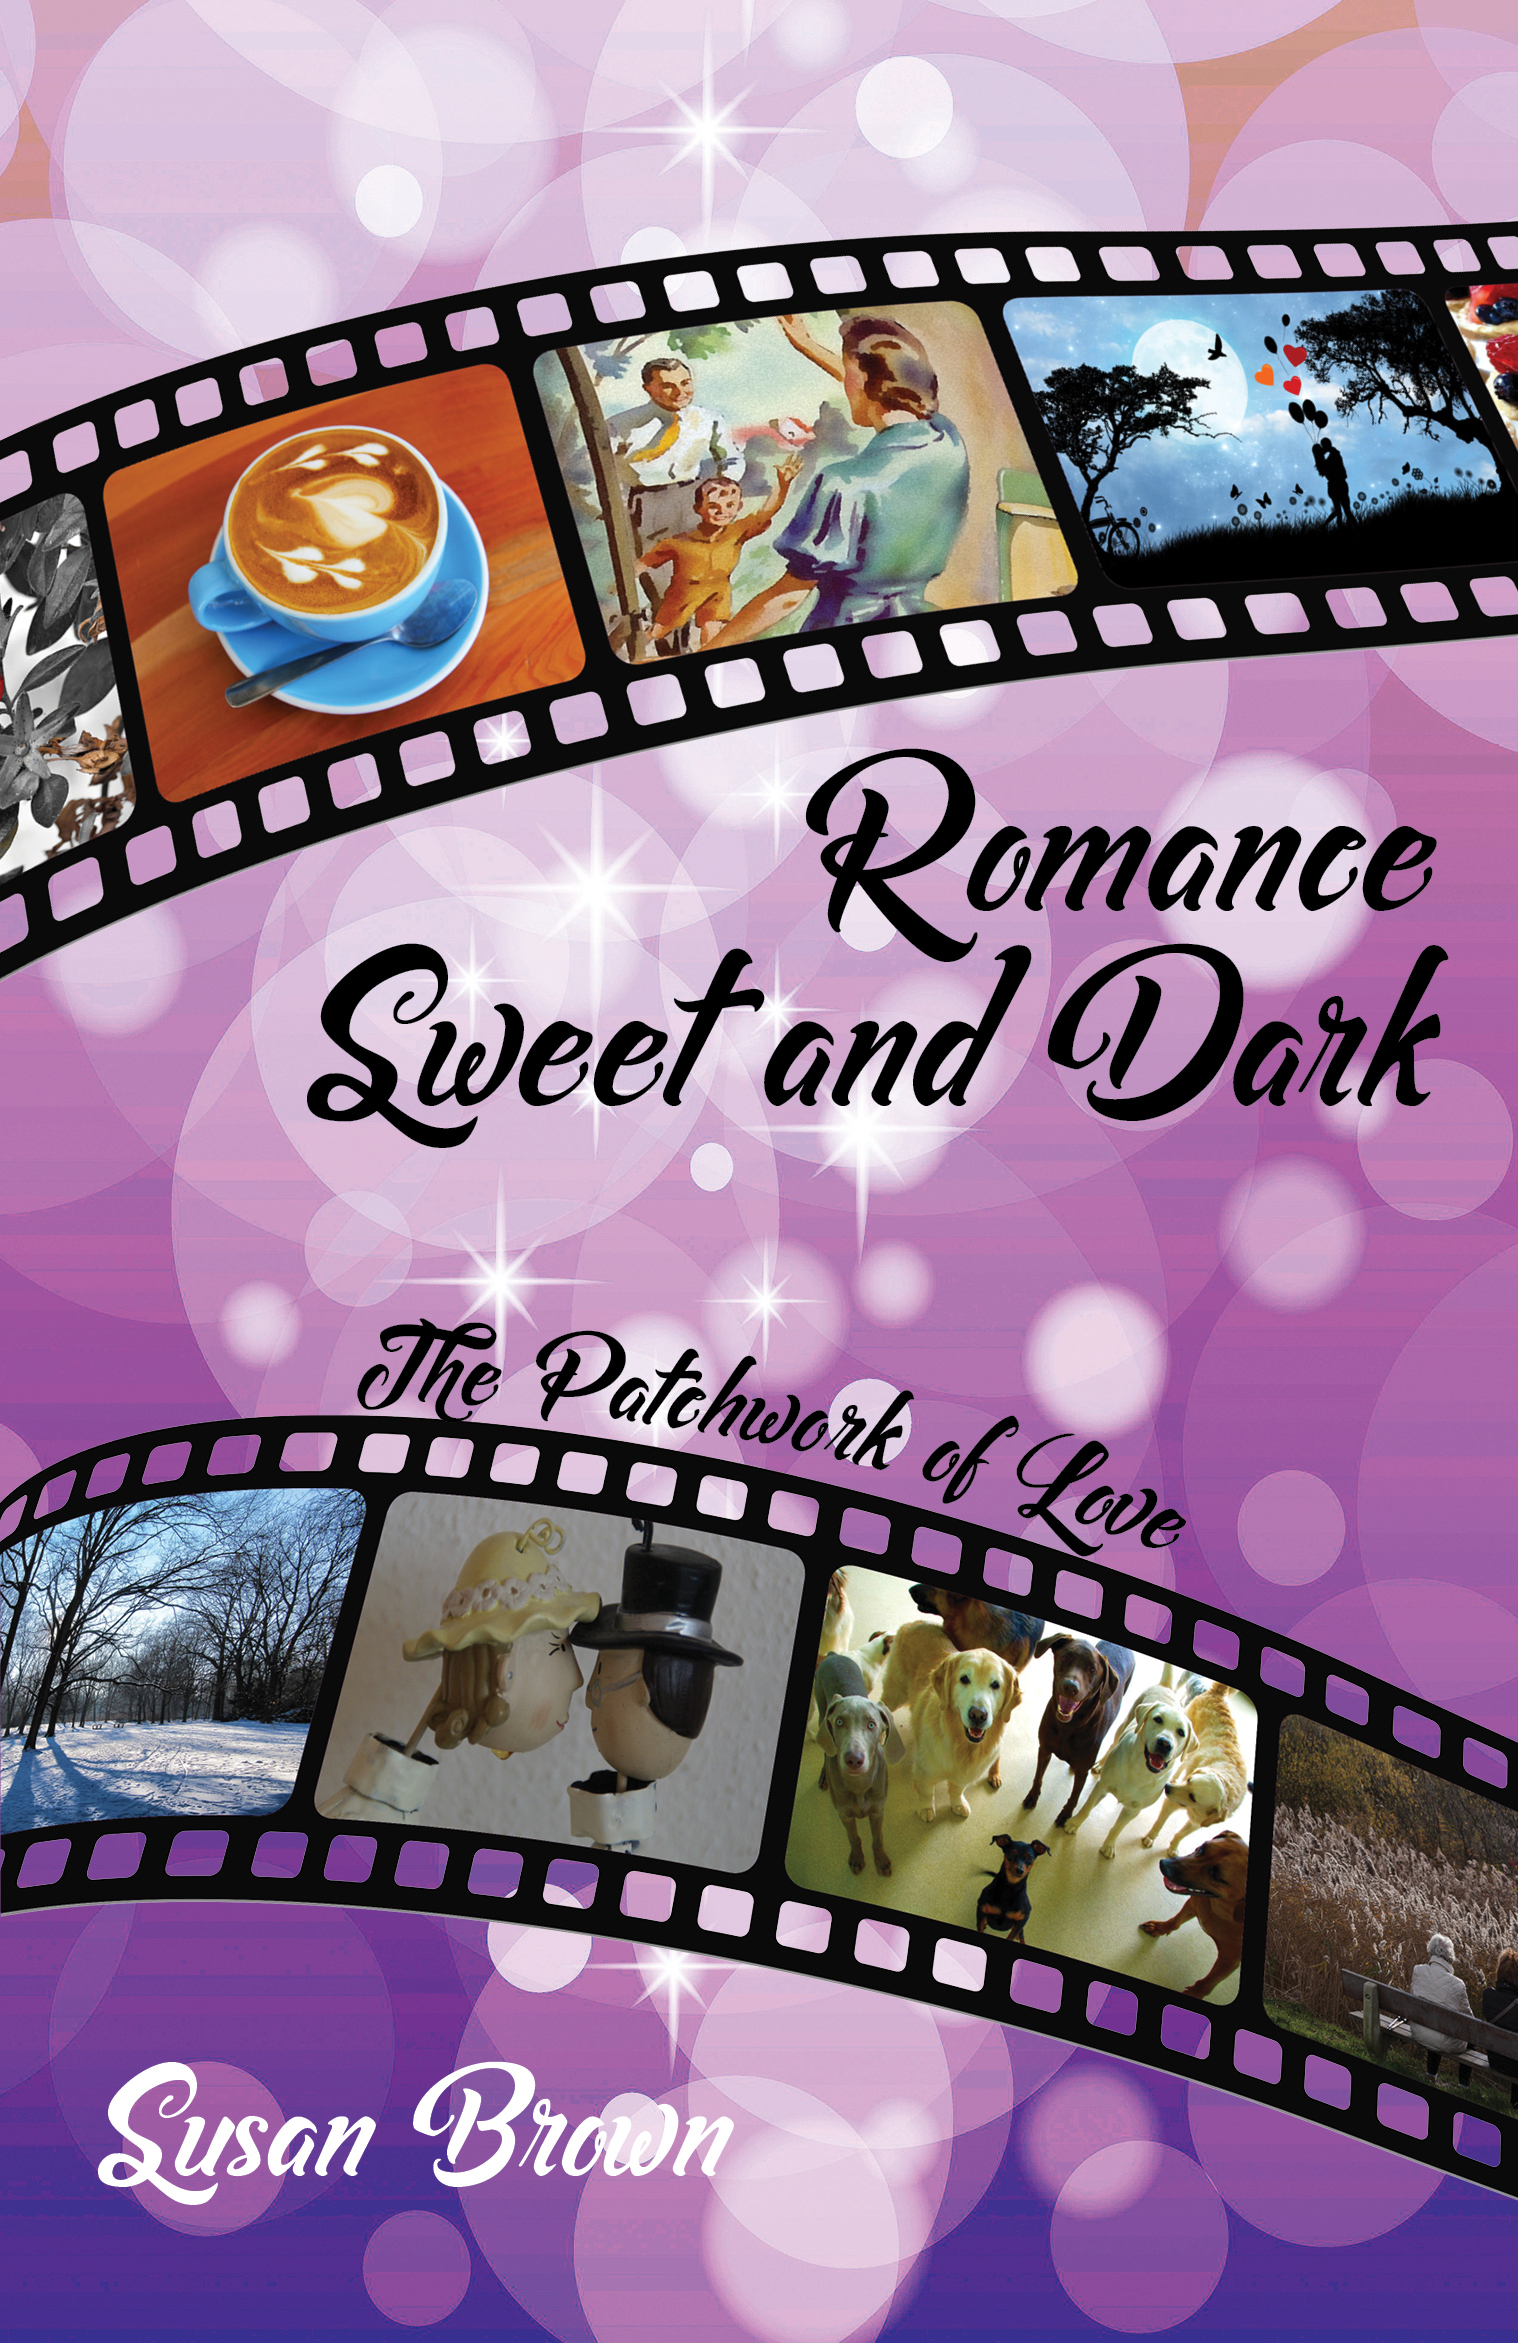 Romance Sweet and Dark by Susan Brown